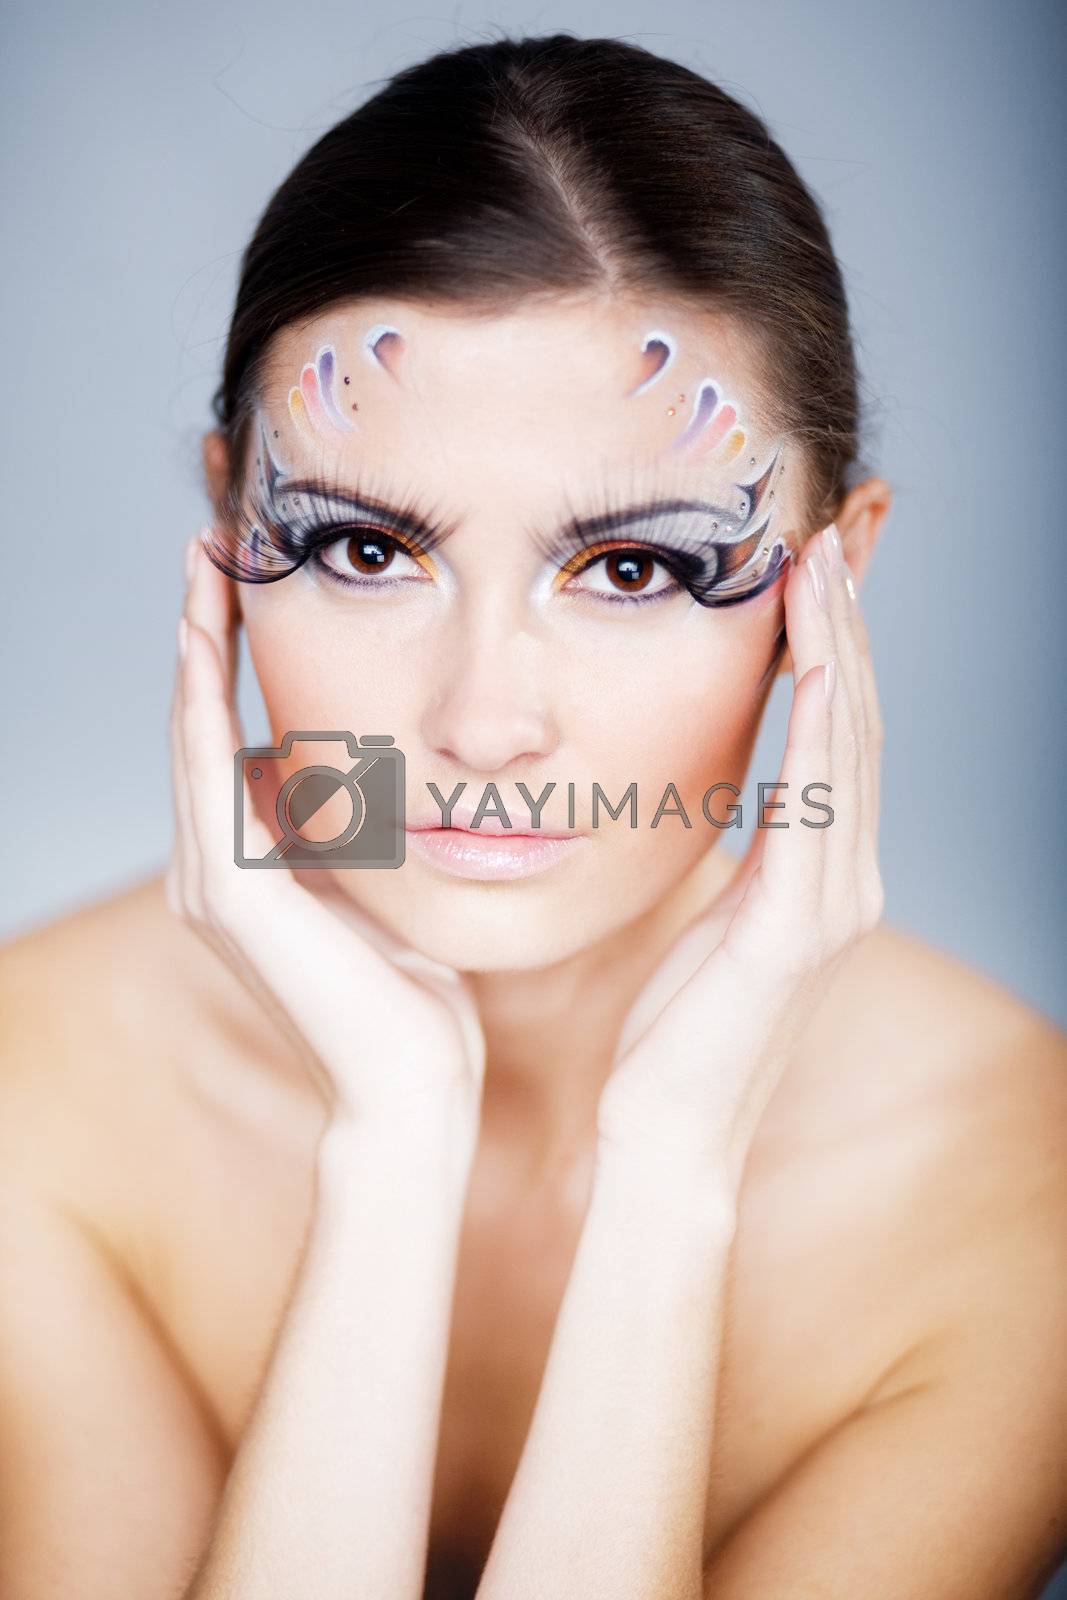 Royalty free image of Beautiful face art by alenkasm